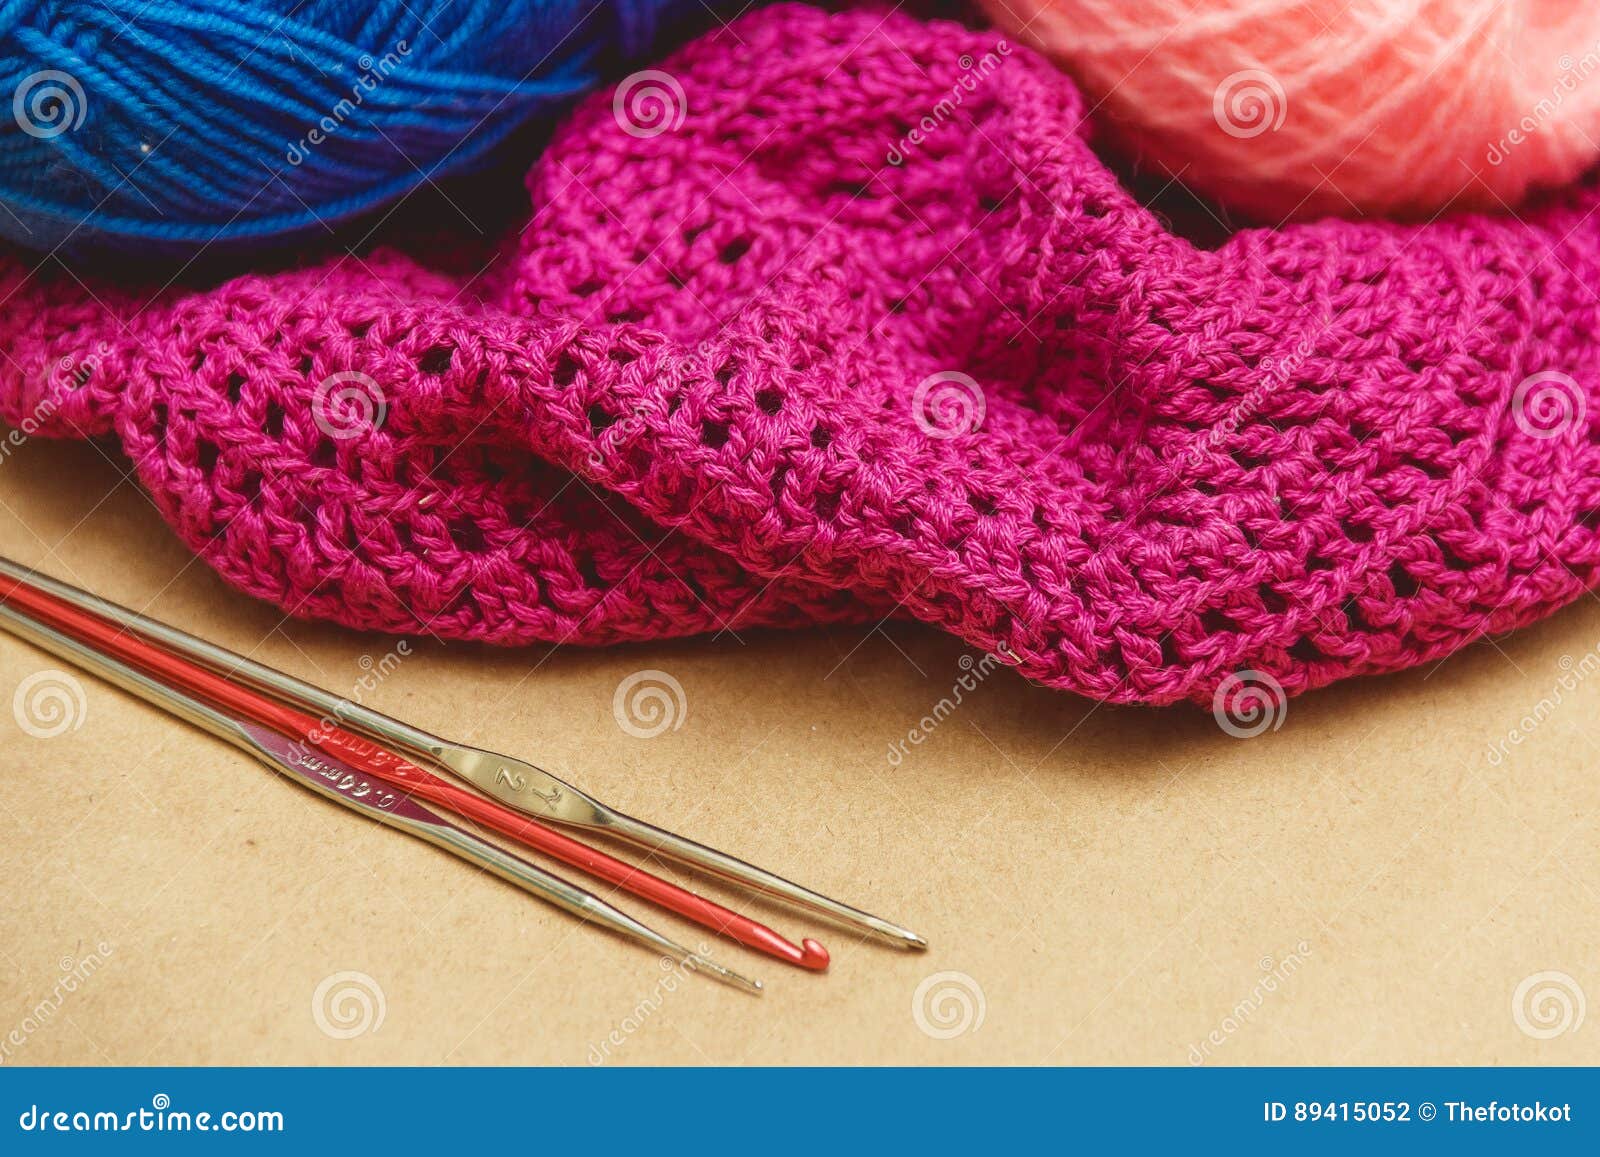 Hanks of Bright Yarn for Knitting on a Bright Background Stock Photo ...